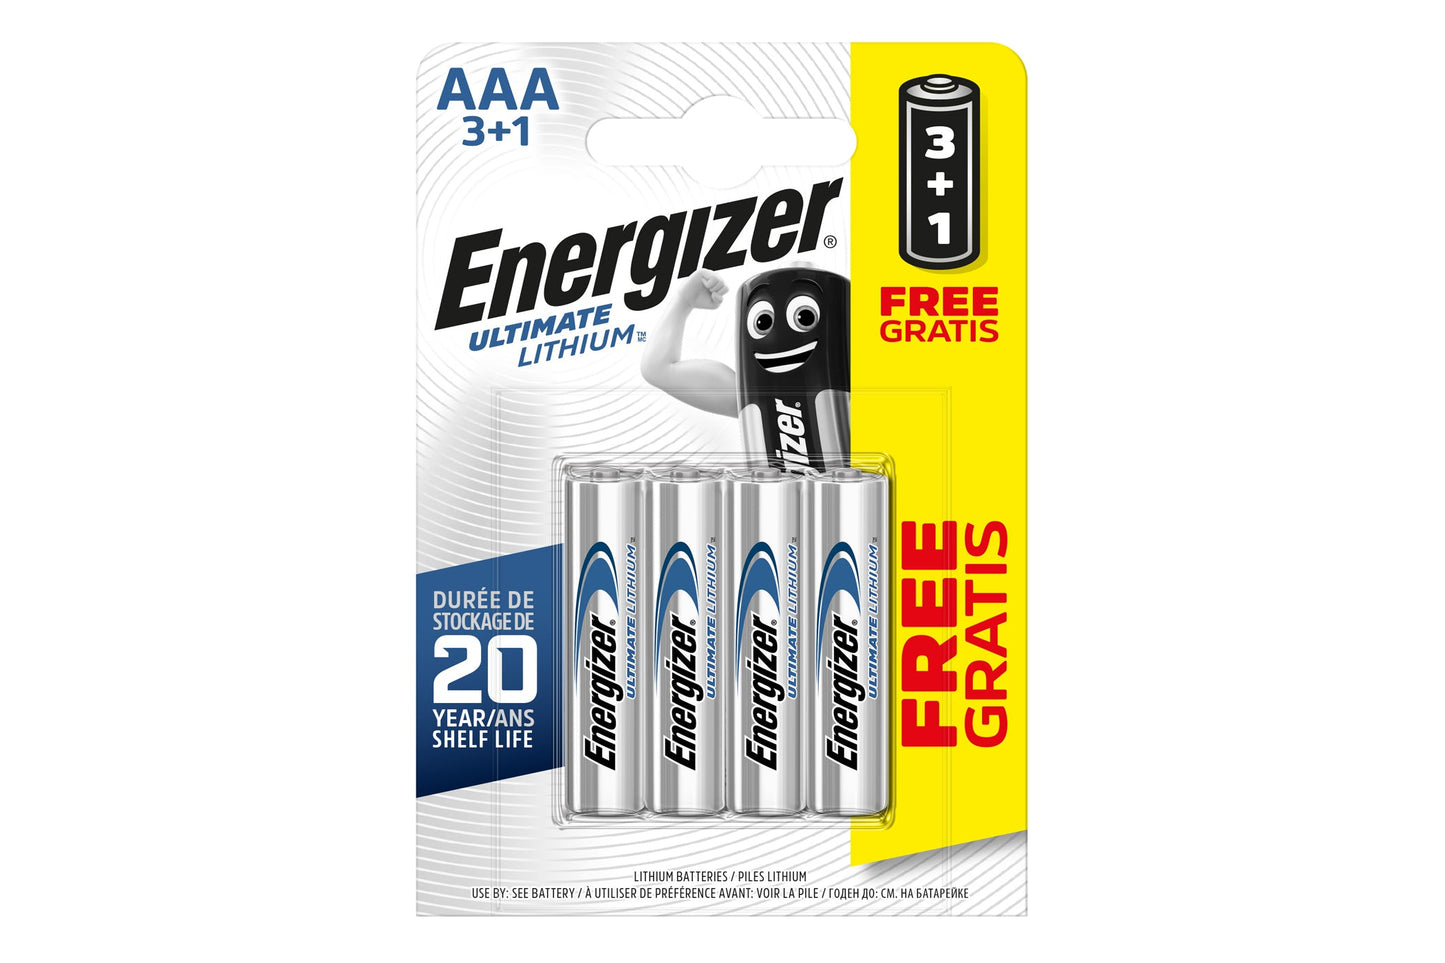 Energizer AAA Ultimate Lithium Batteries - Pack of 4 - maplin.co.uk